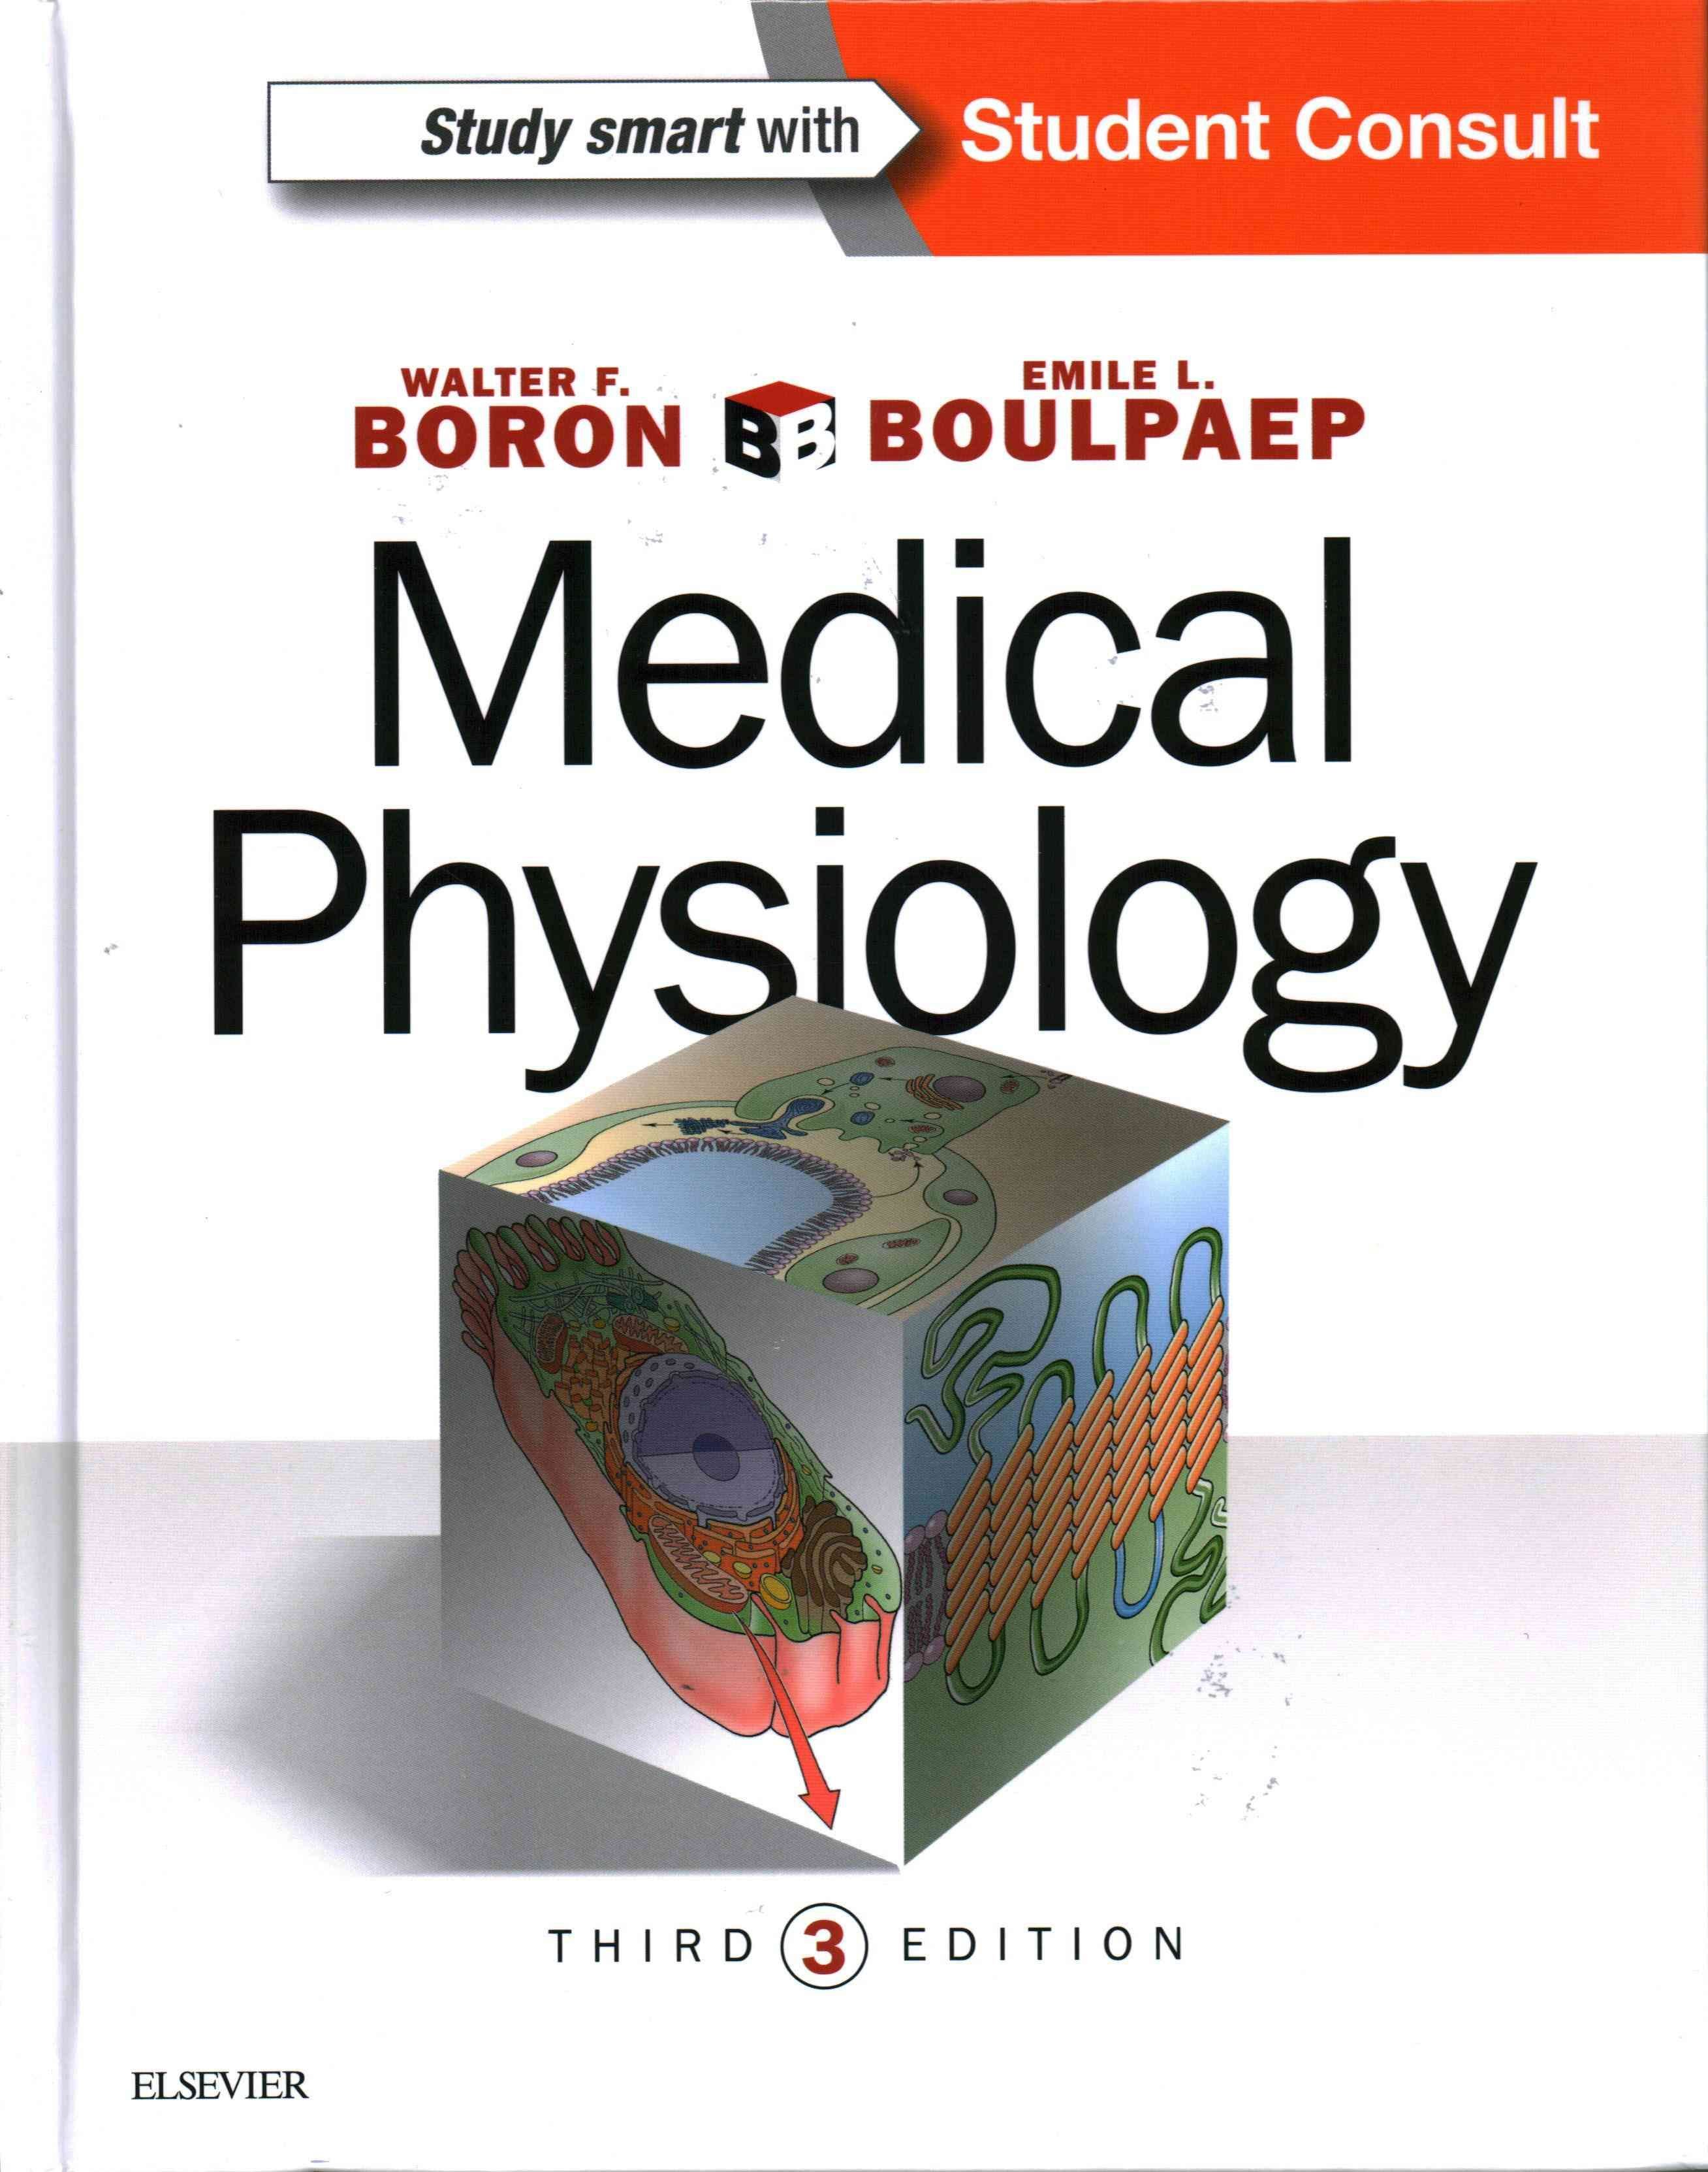 questions for boron and boulpaep medical physiology